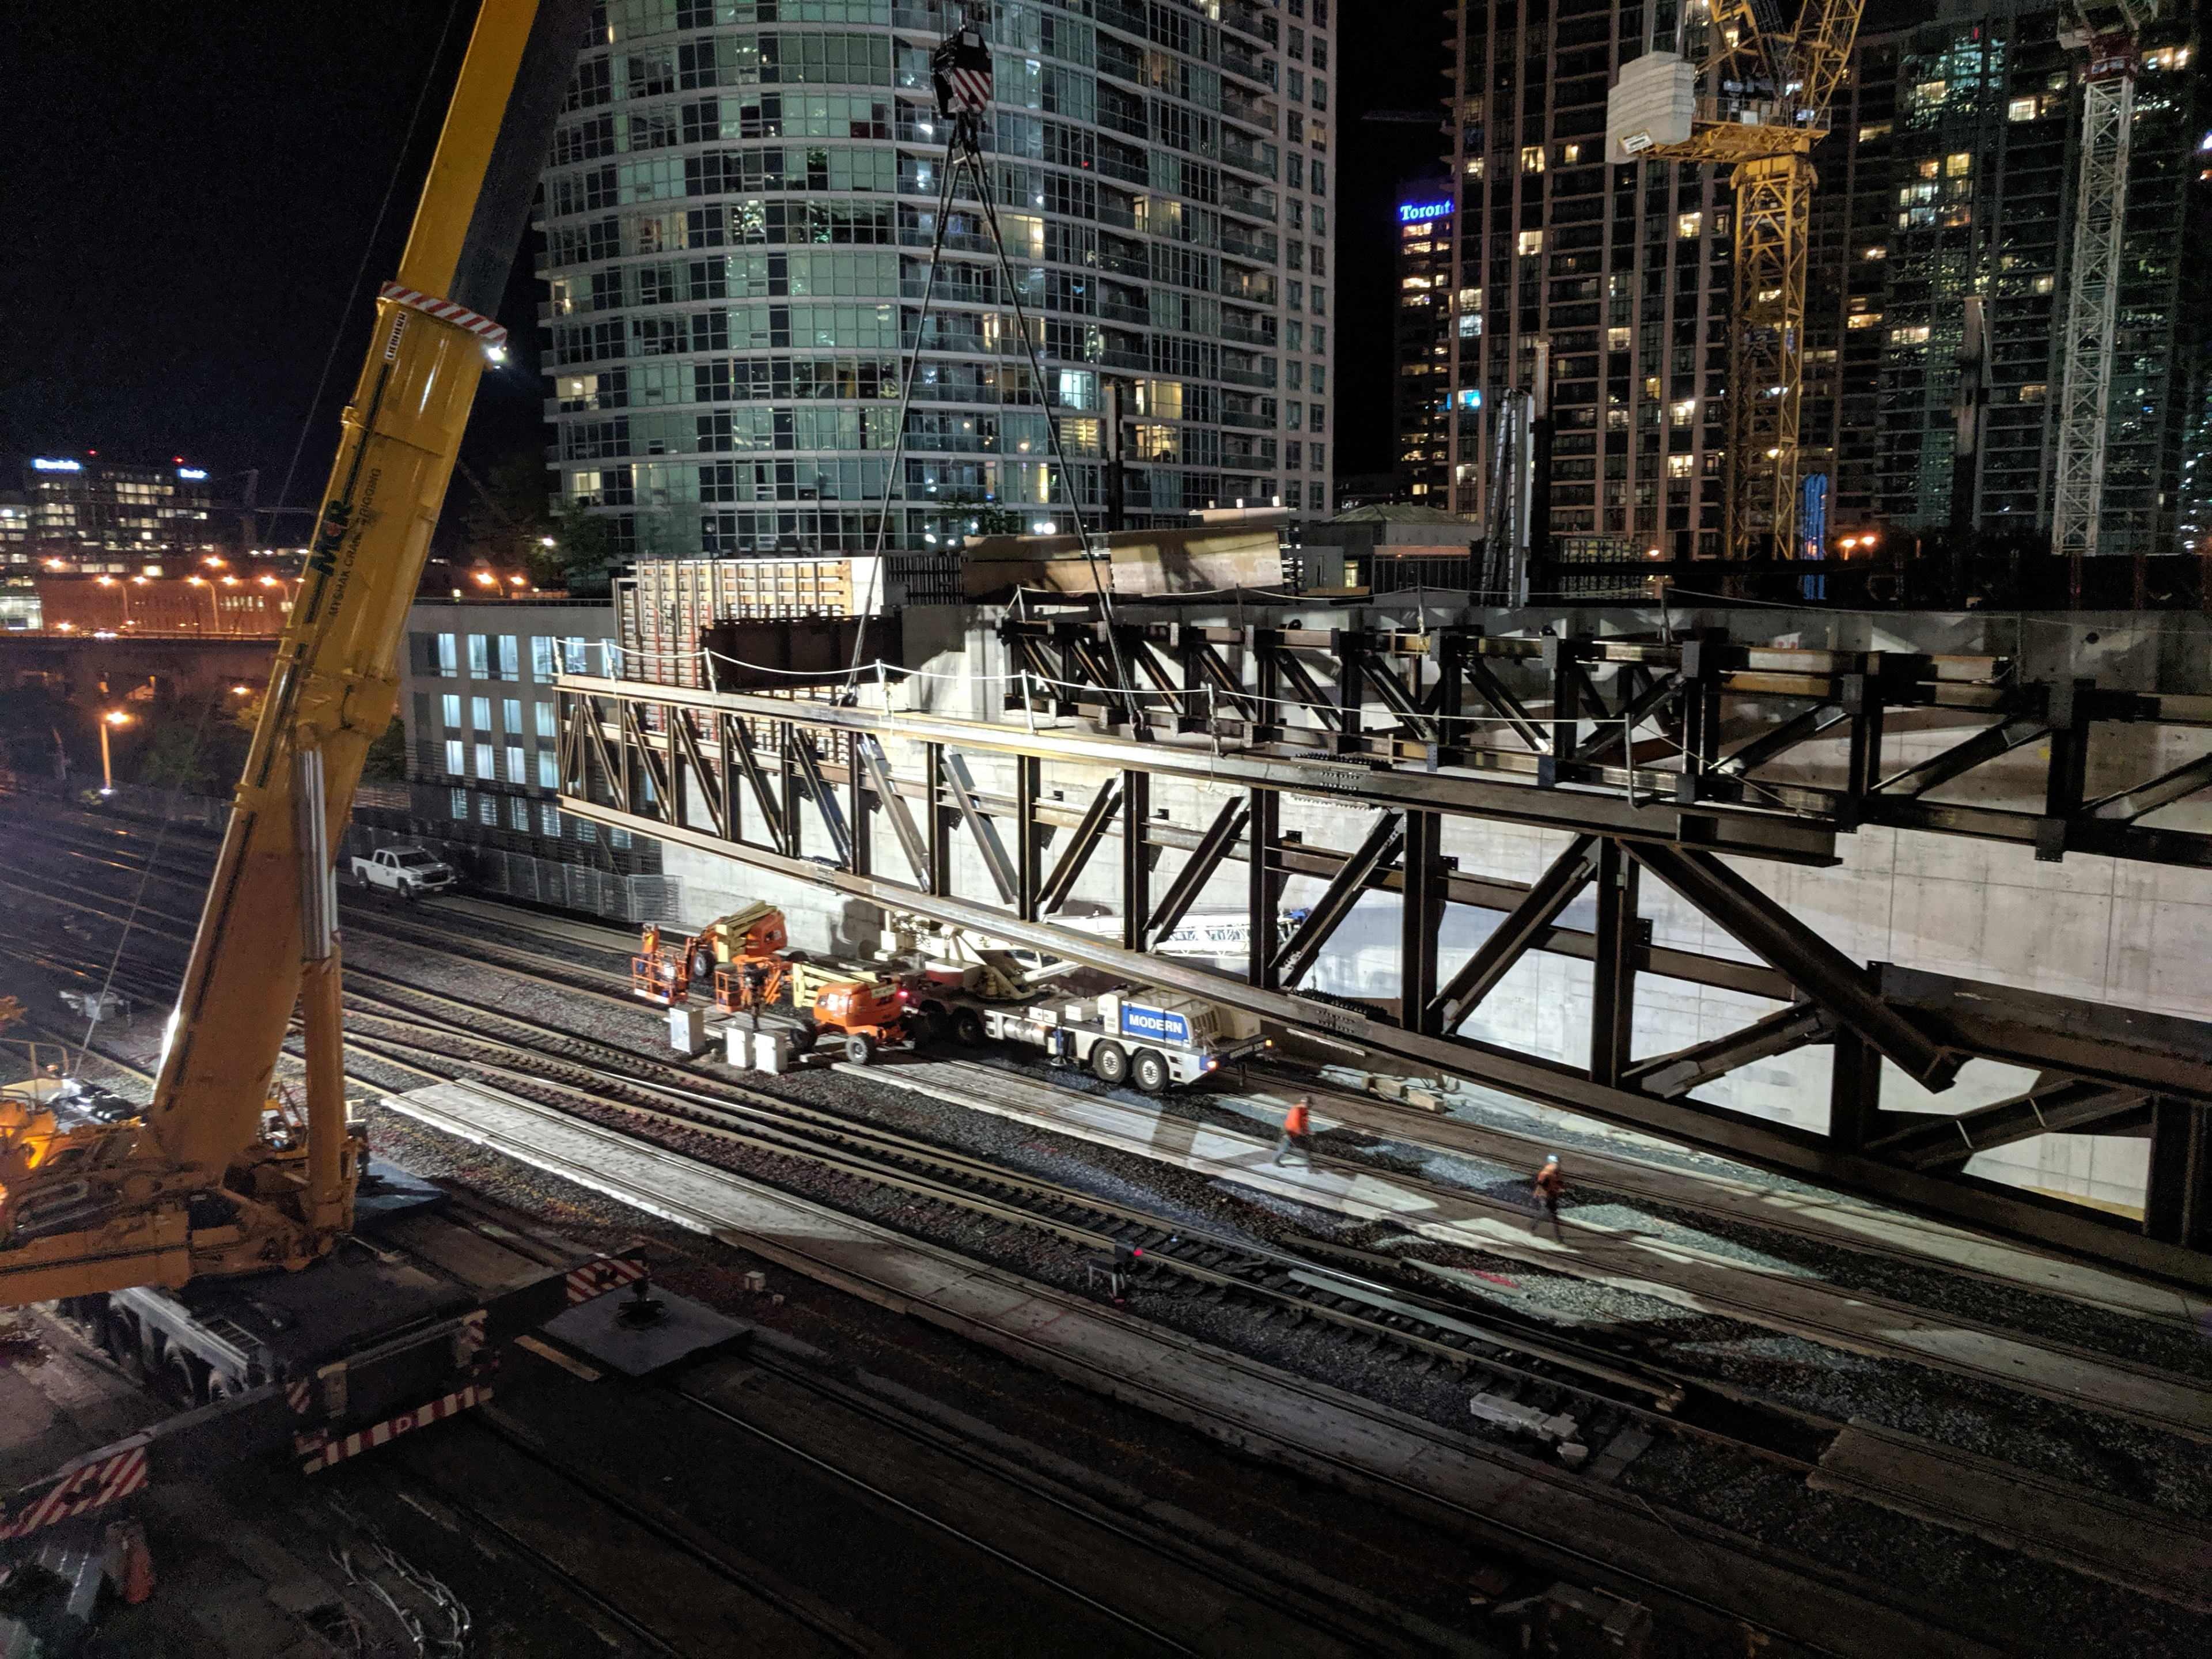 A powerful crane lifts the massive metal truss over the tracks.